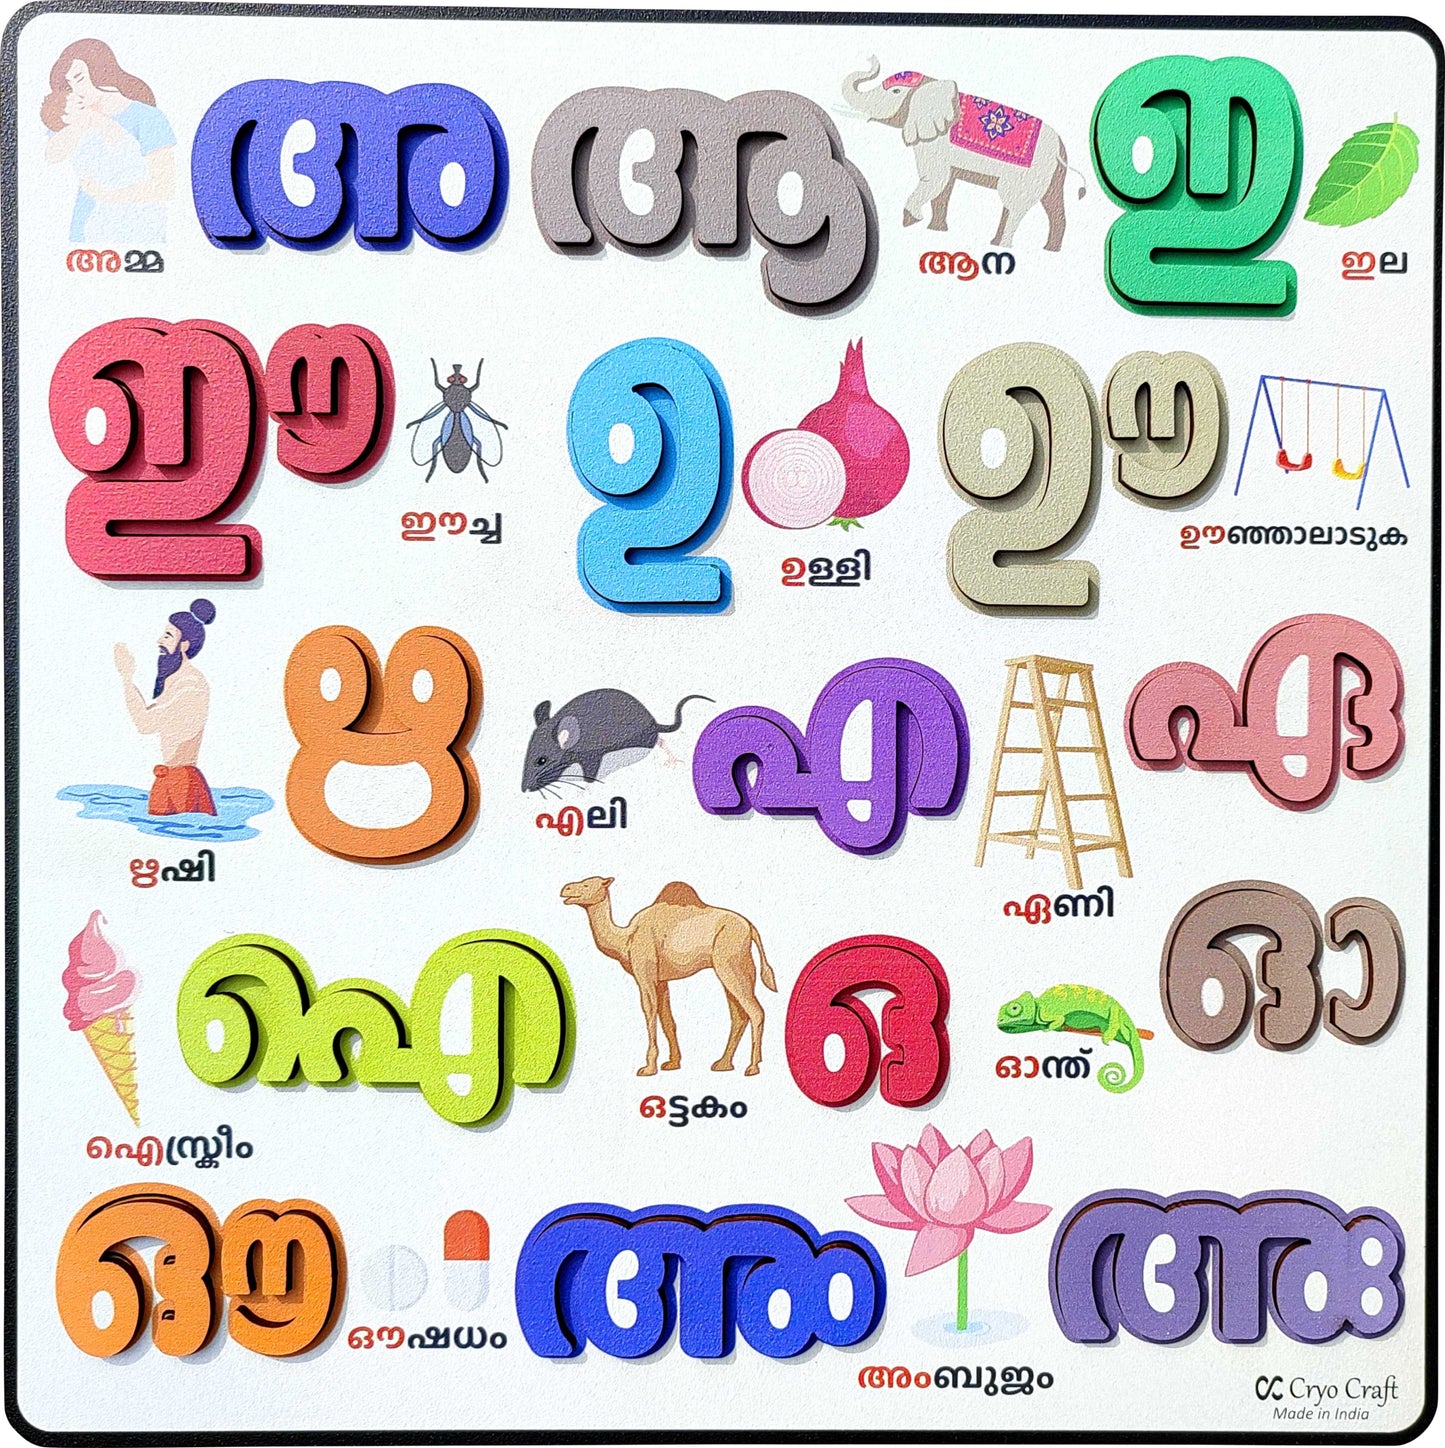 Buy Wooden Malayalam Letters Puzzle Board with Pictures - SkilloToys.com